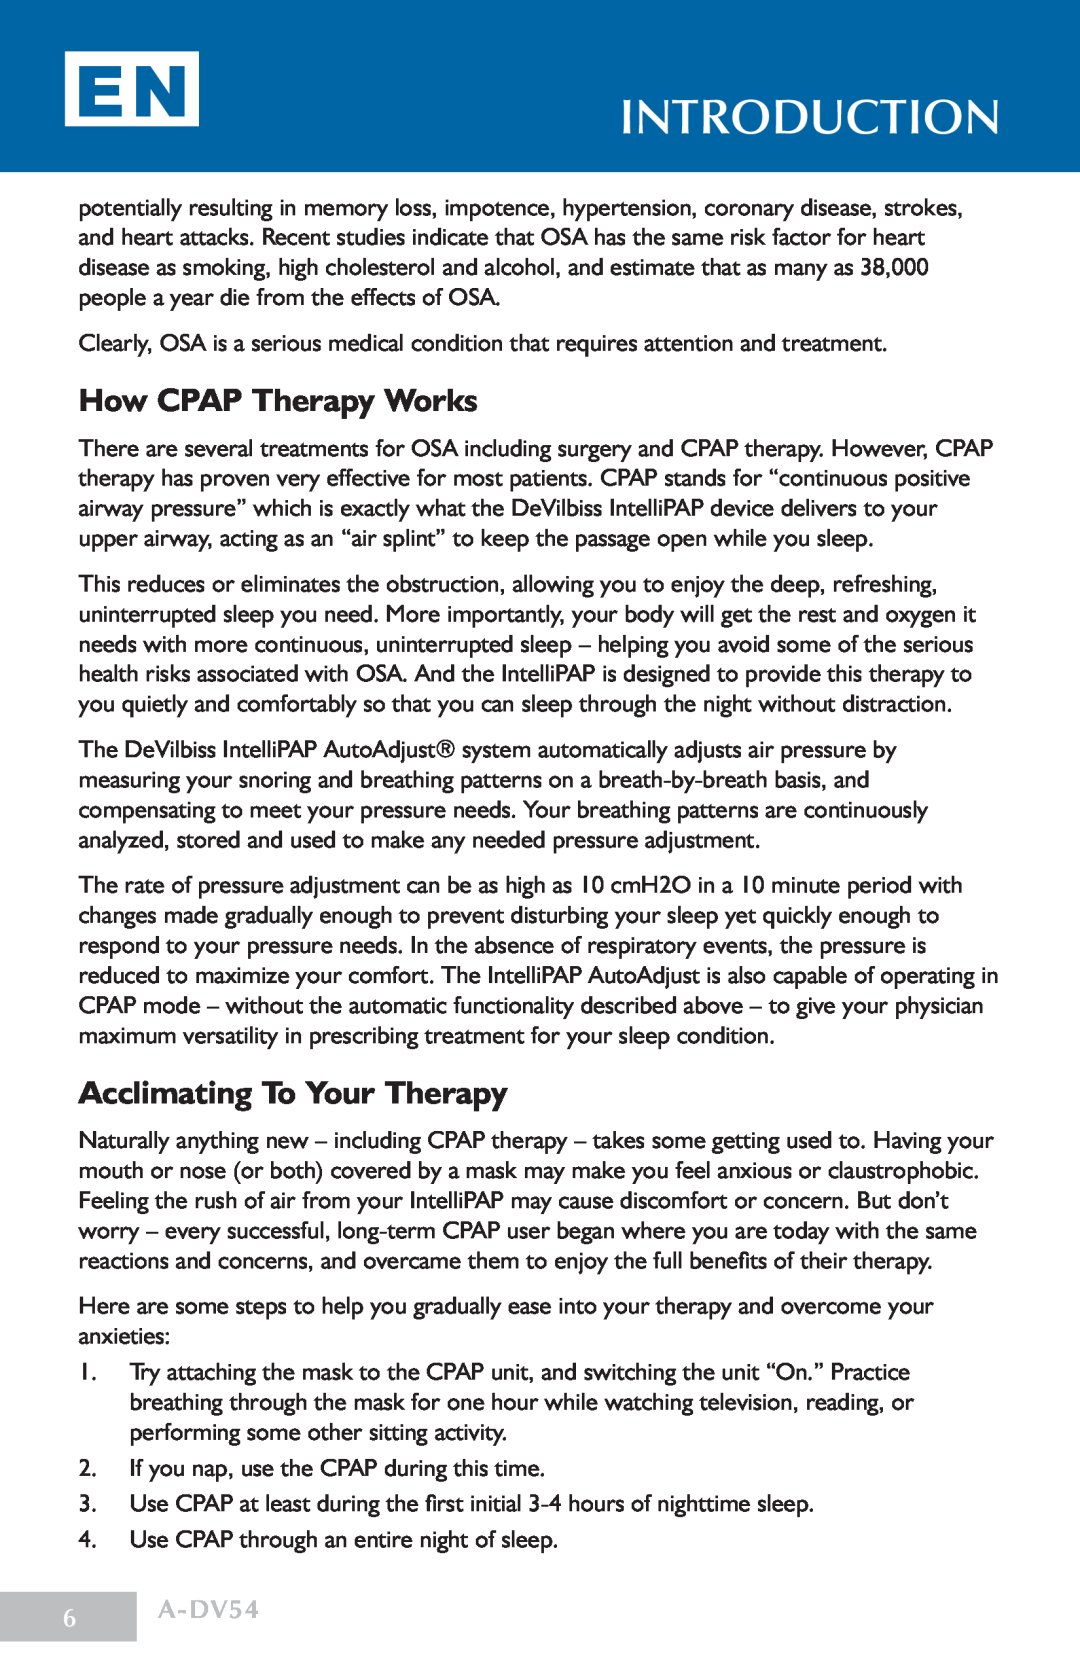 DeVillbiss Air Power Company manual How CPAP Therapy Works, Acclimating To Your Therapy, A-DV54, introduction 